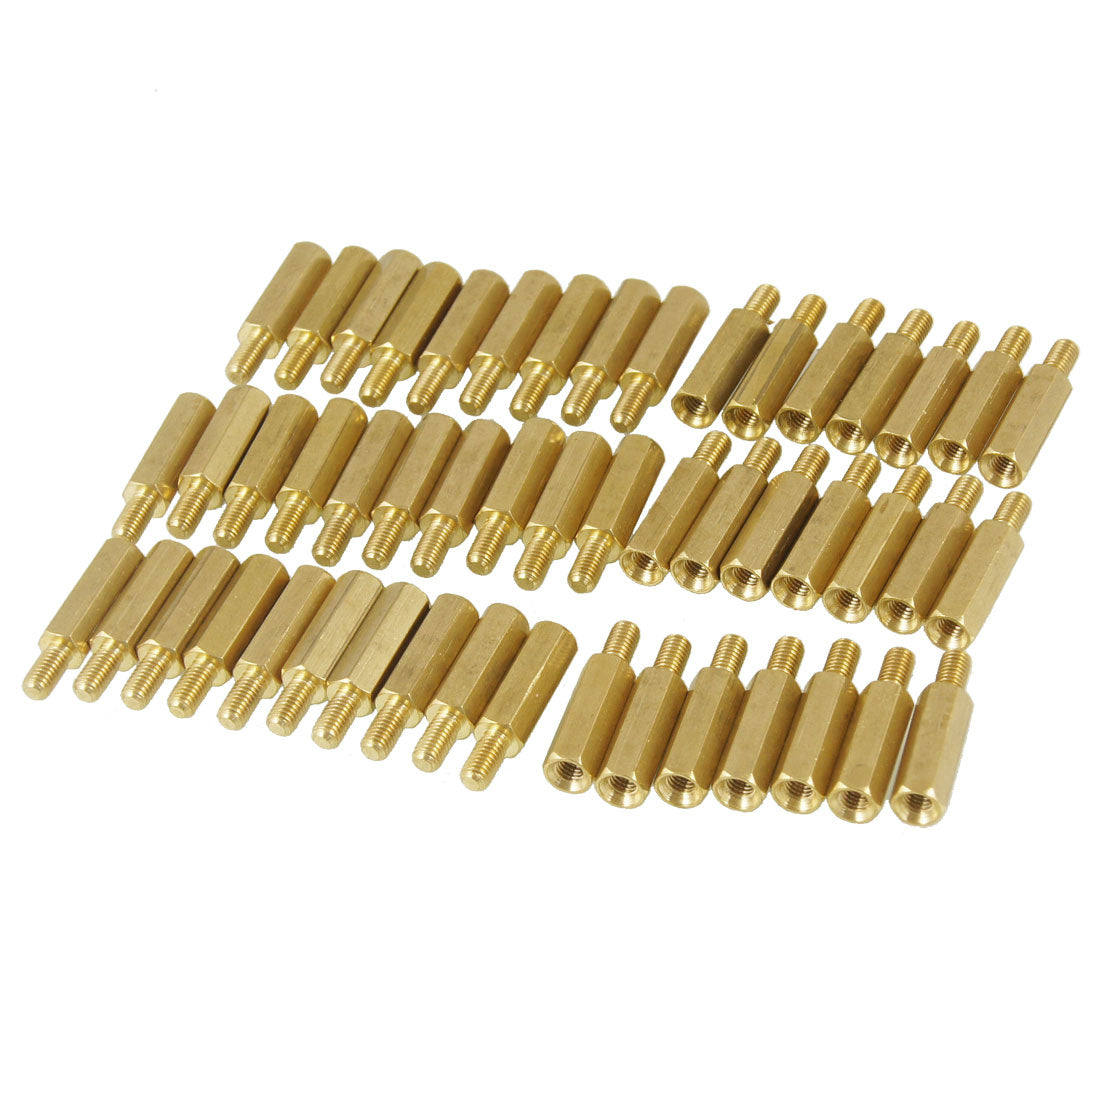 uxcell Uxcell 25mm Body Length 20 Pcs Screw PCB Stand-off Spacer Hex M3 Male x M3 Female